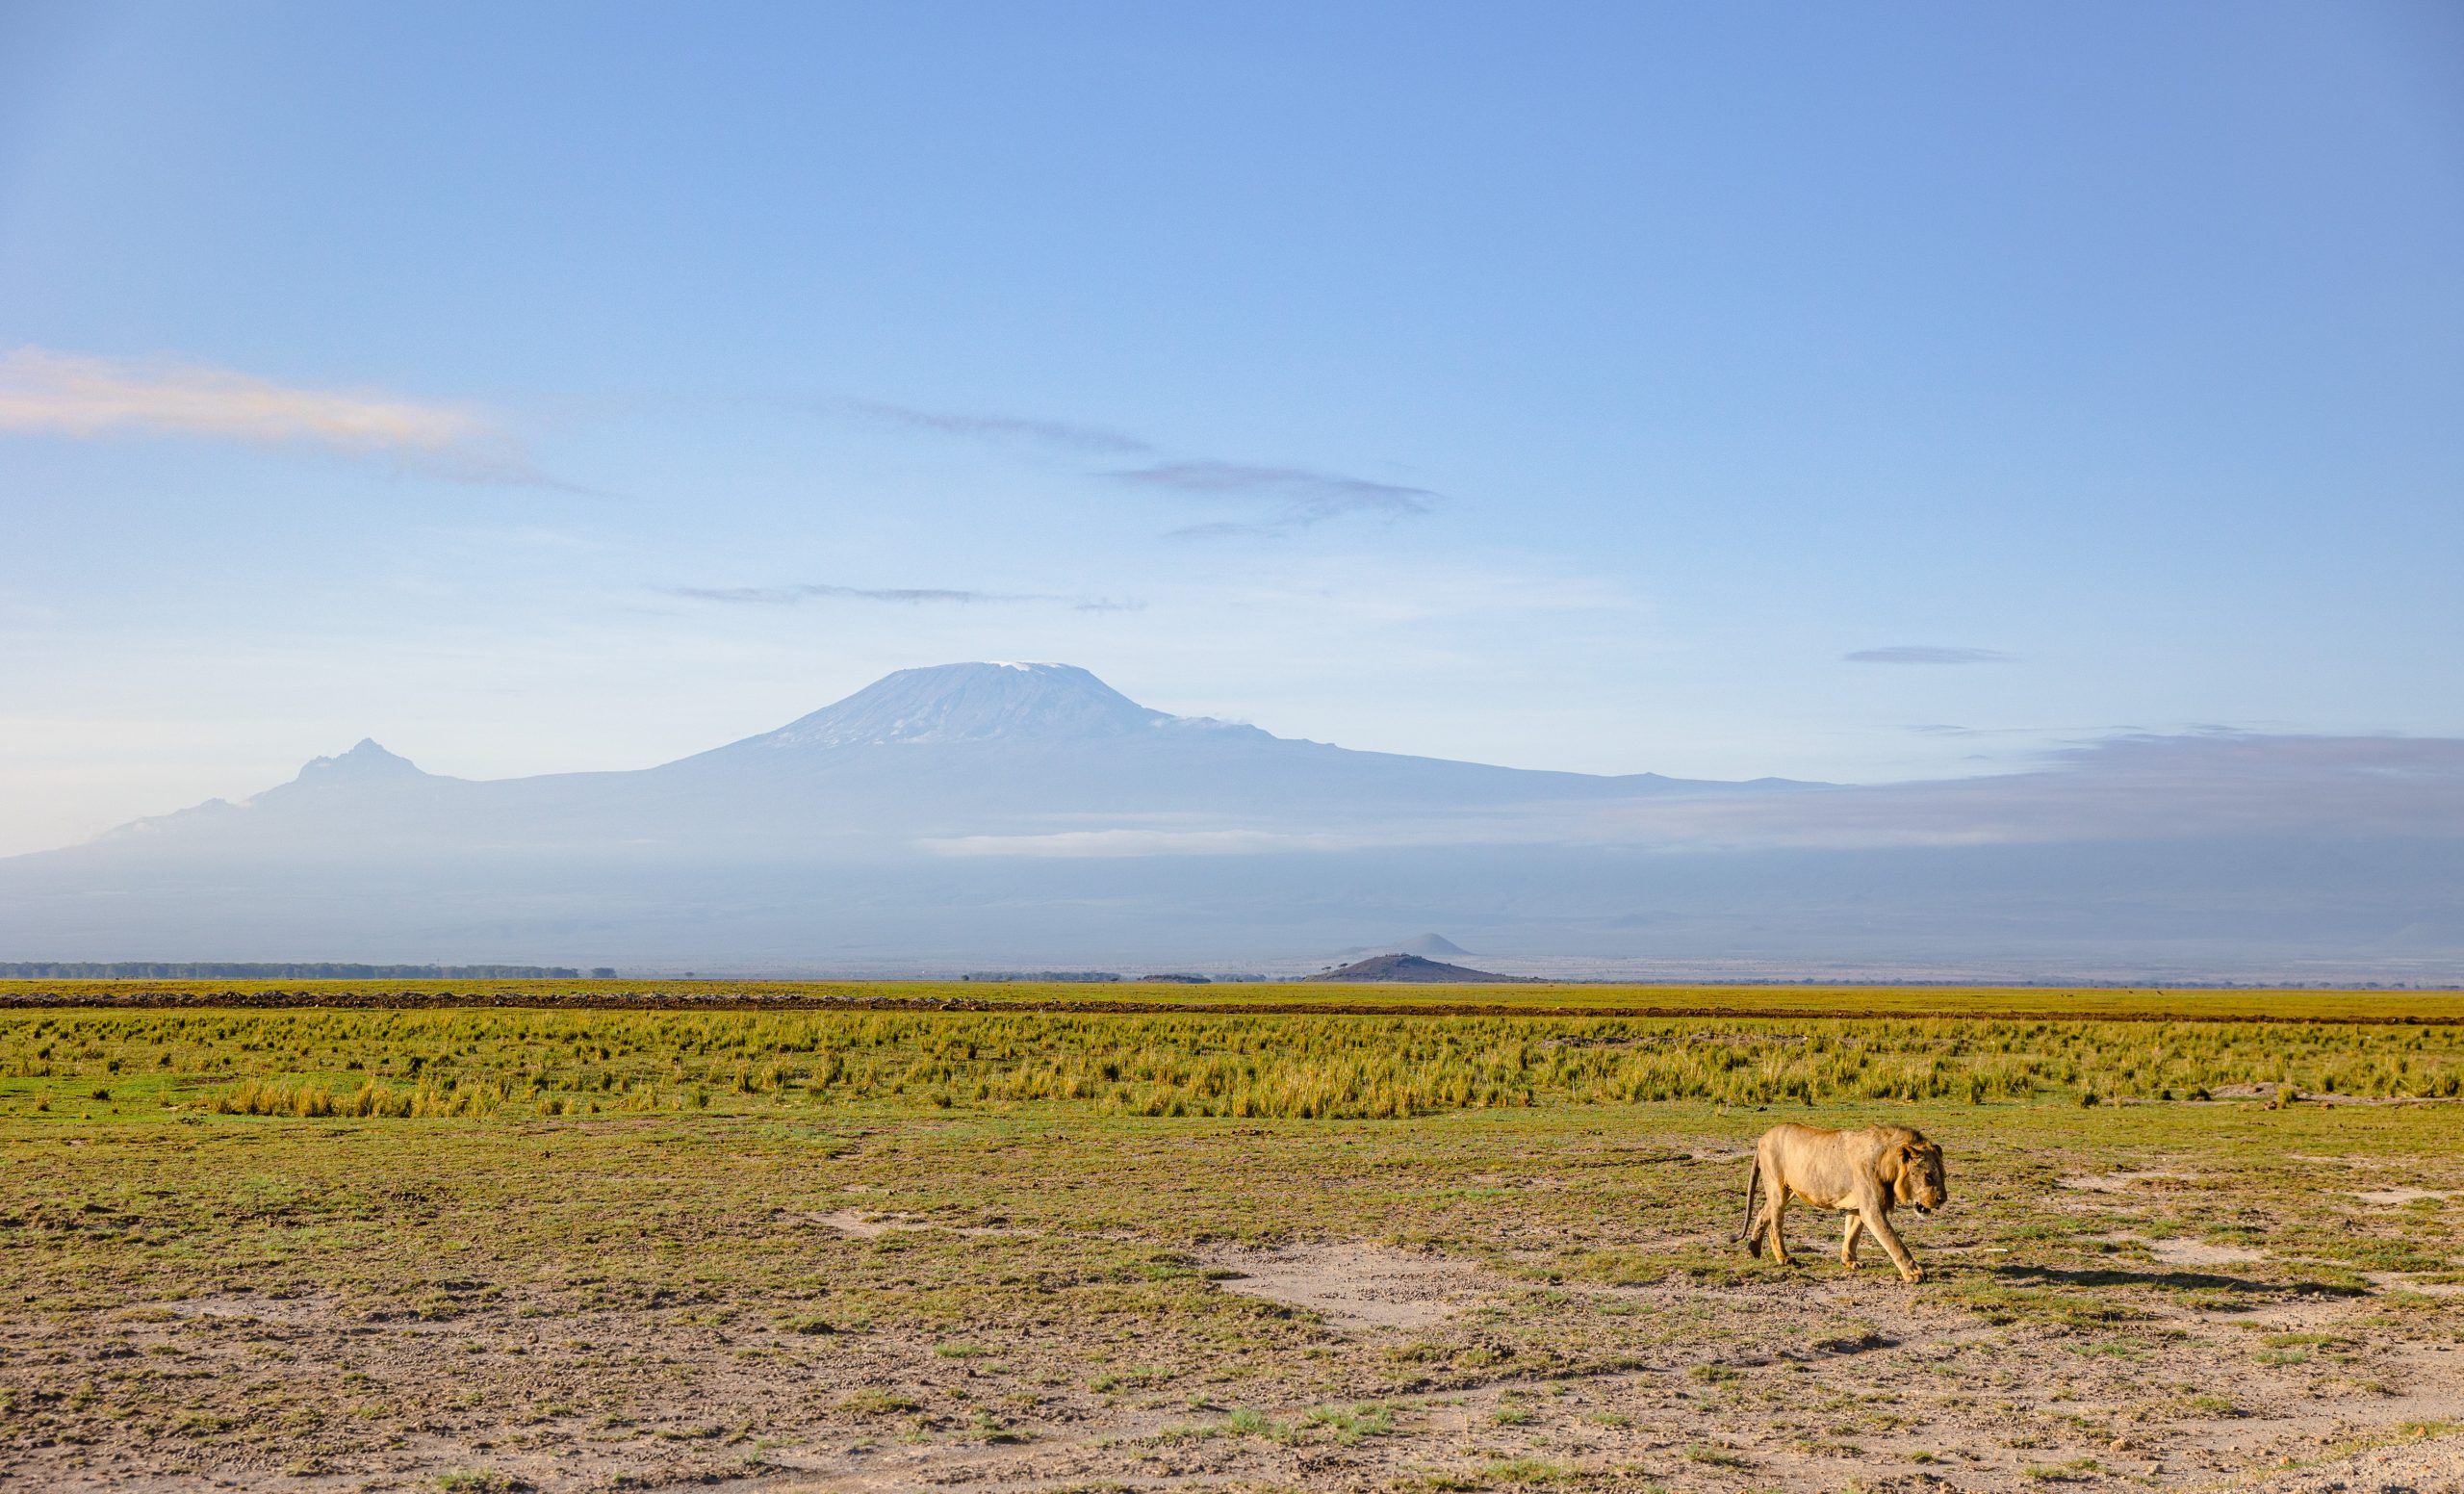 A photo showing a vast African landscape with mpuntains in the distance and green grass in the foreground. A single lioness is seen walking 